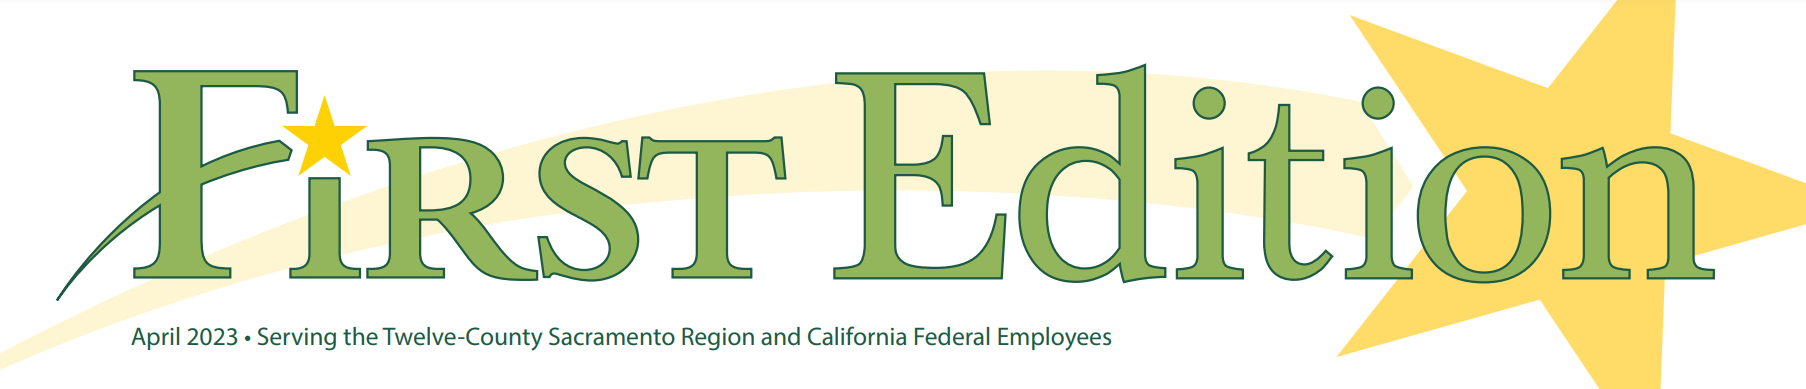 First Edition banner - April 2023 - Serving the Twelve County Sacramento Region and California Federal Employees